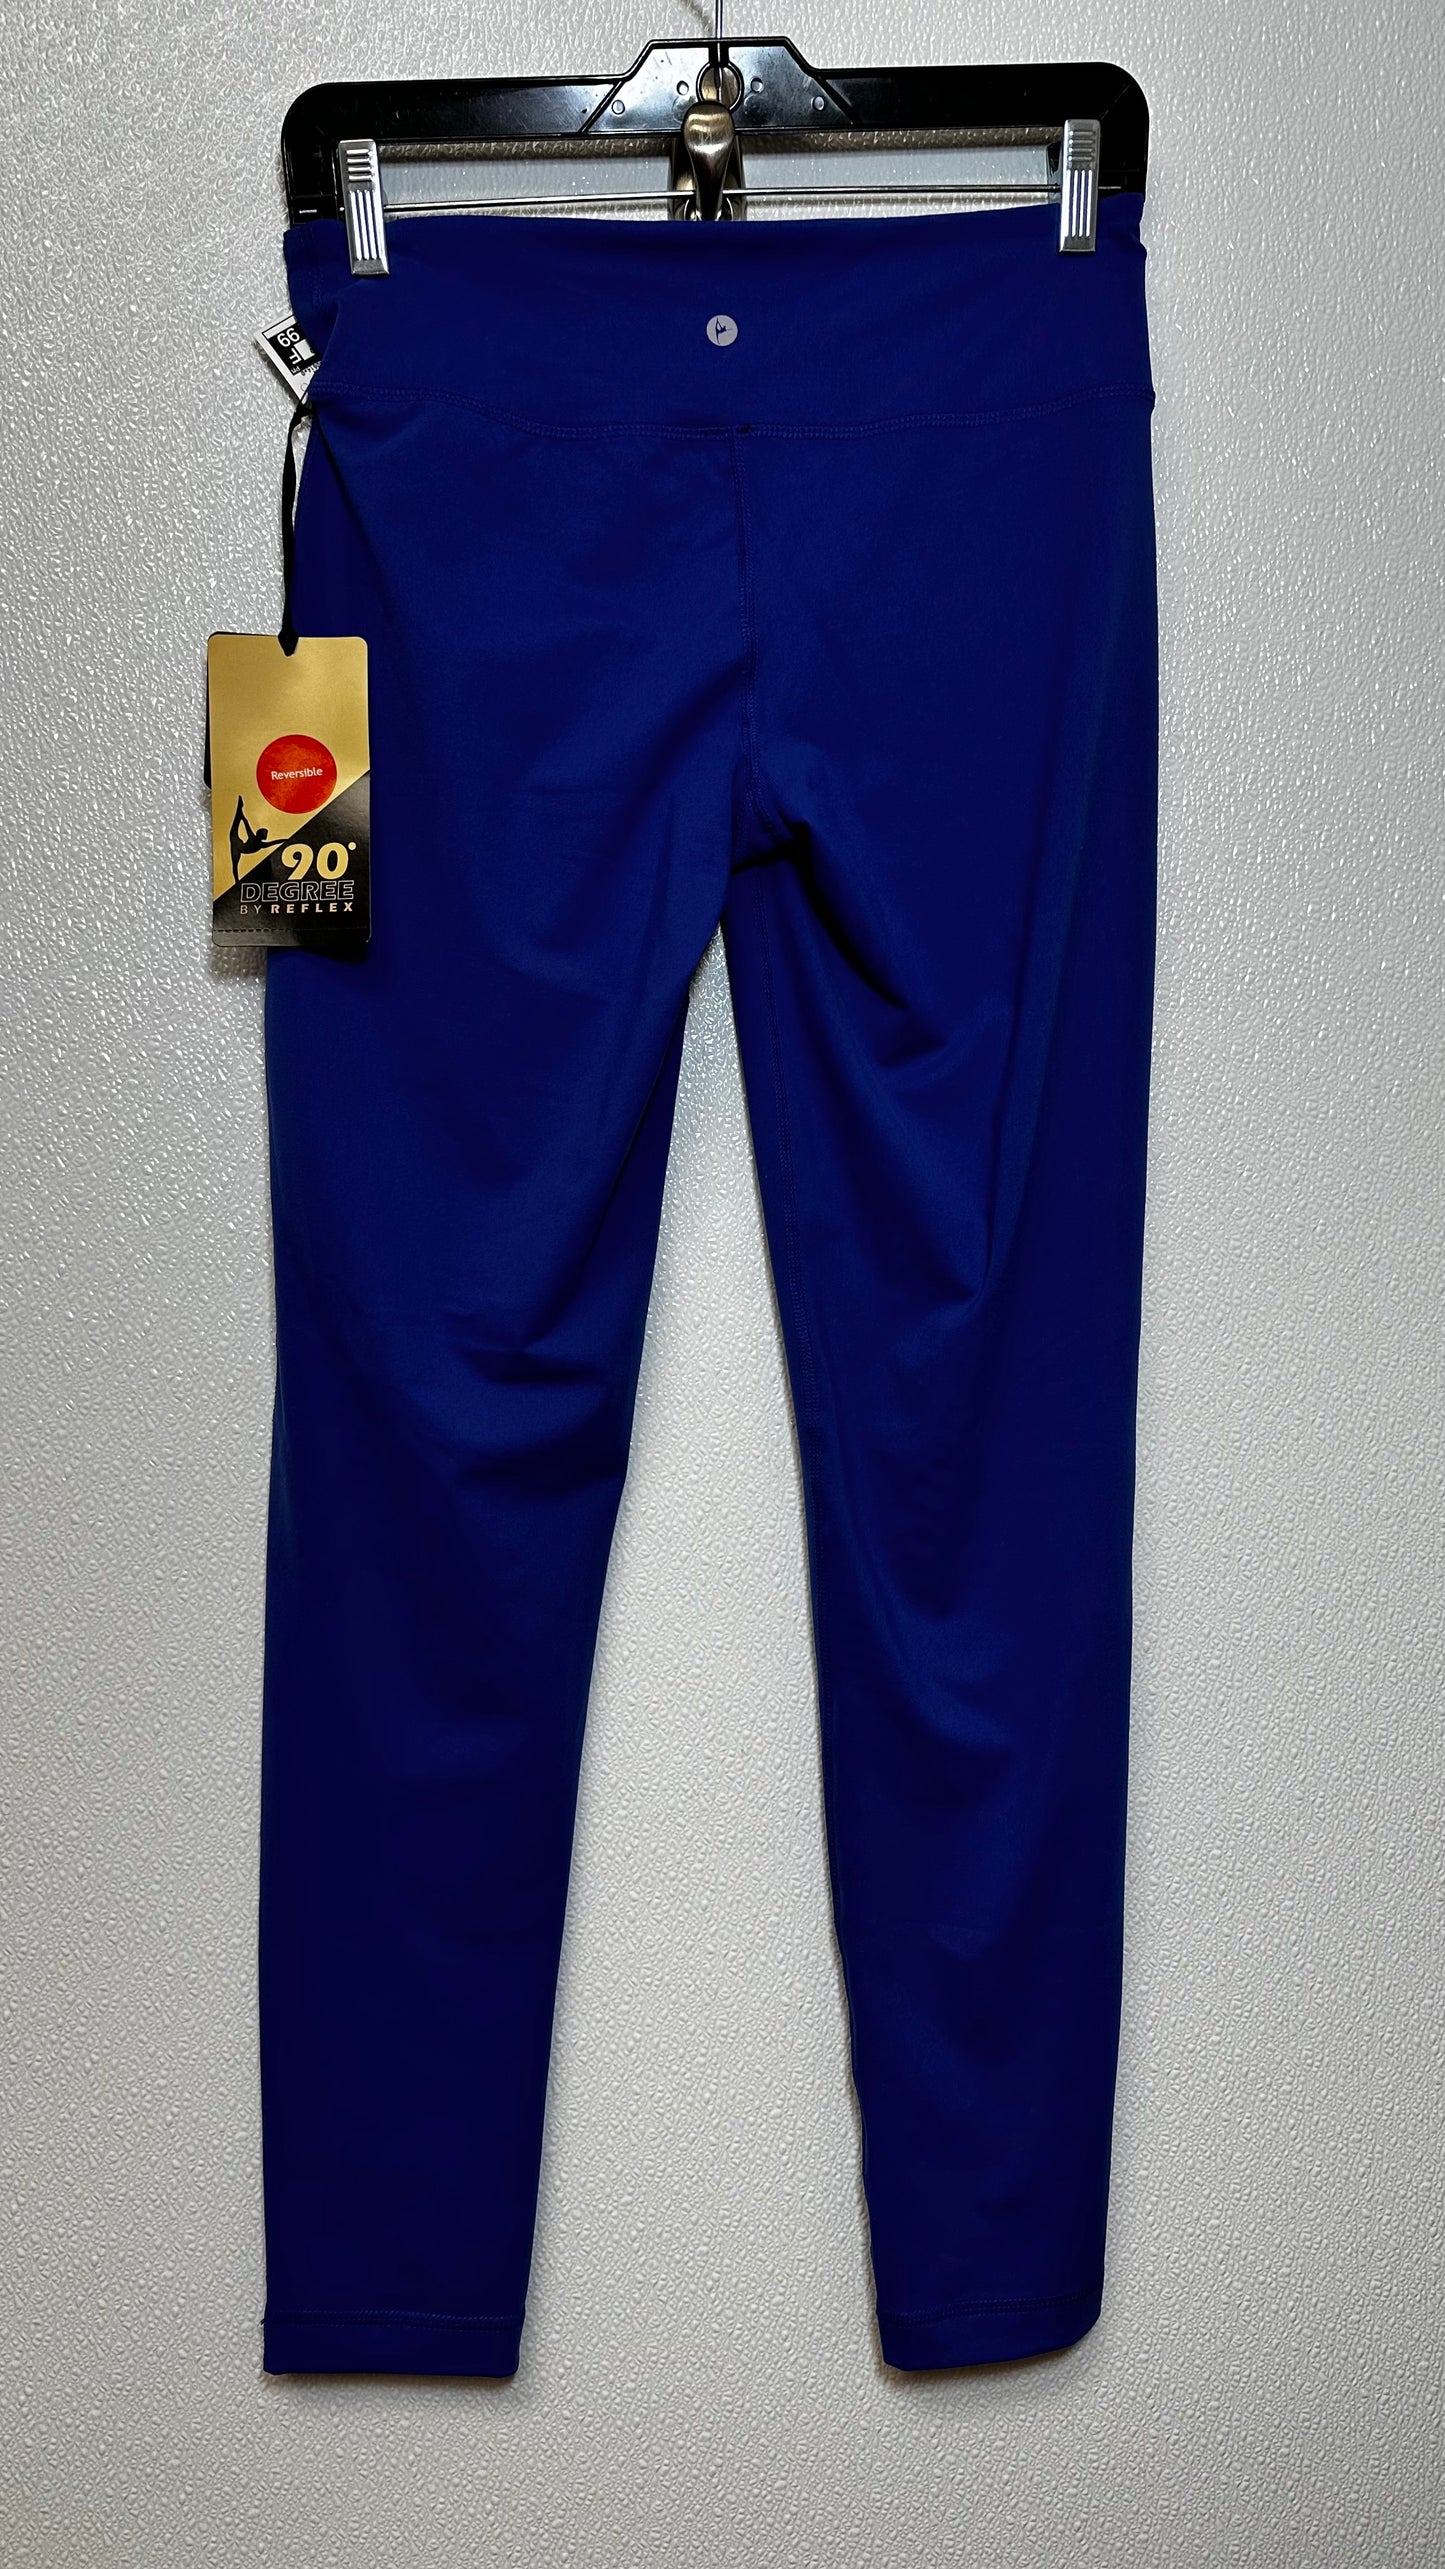 Royal Blue Athletic Leggings 90 Degrees By Reflex, Size S